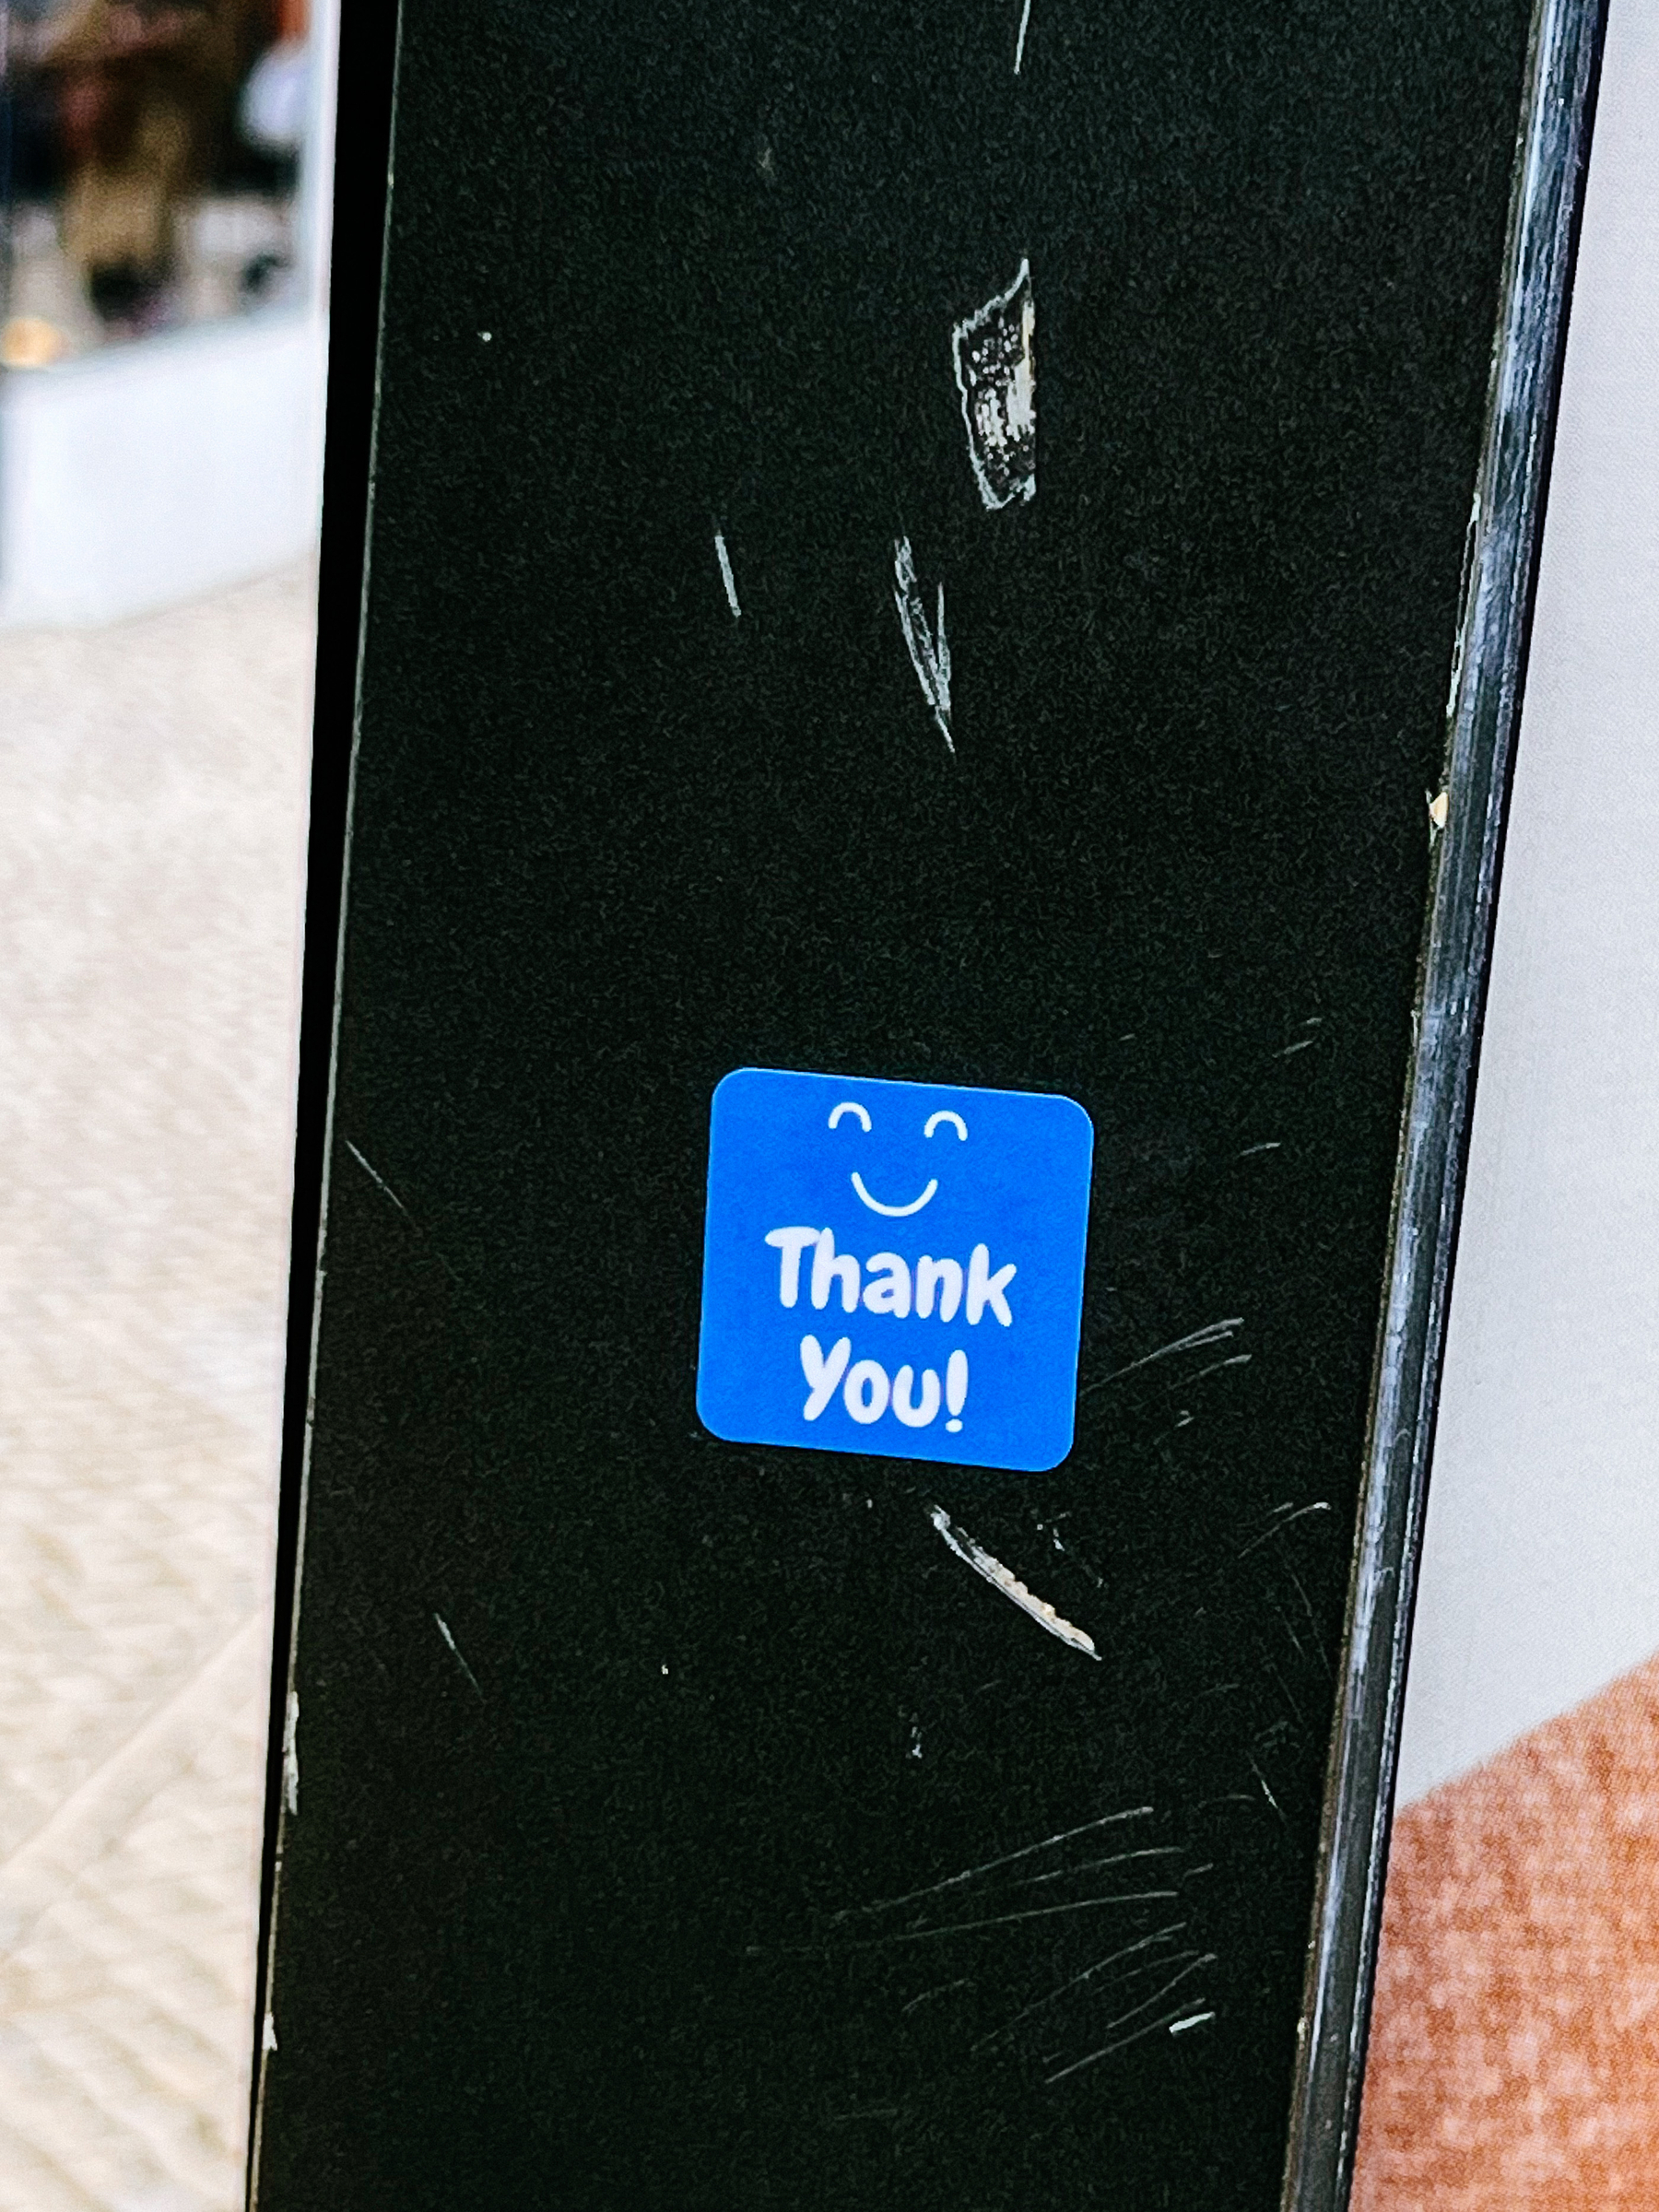 Sticker with a smily mouth and eyes, and the words “Thank you”.